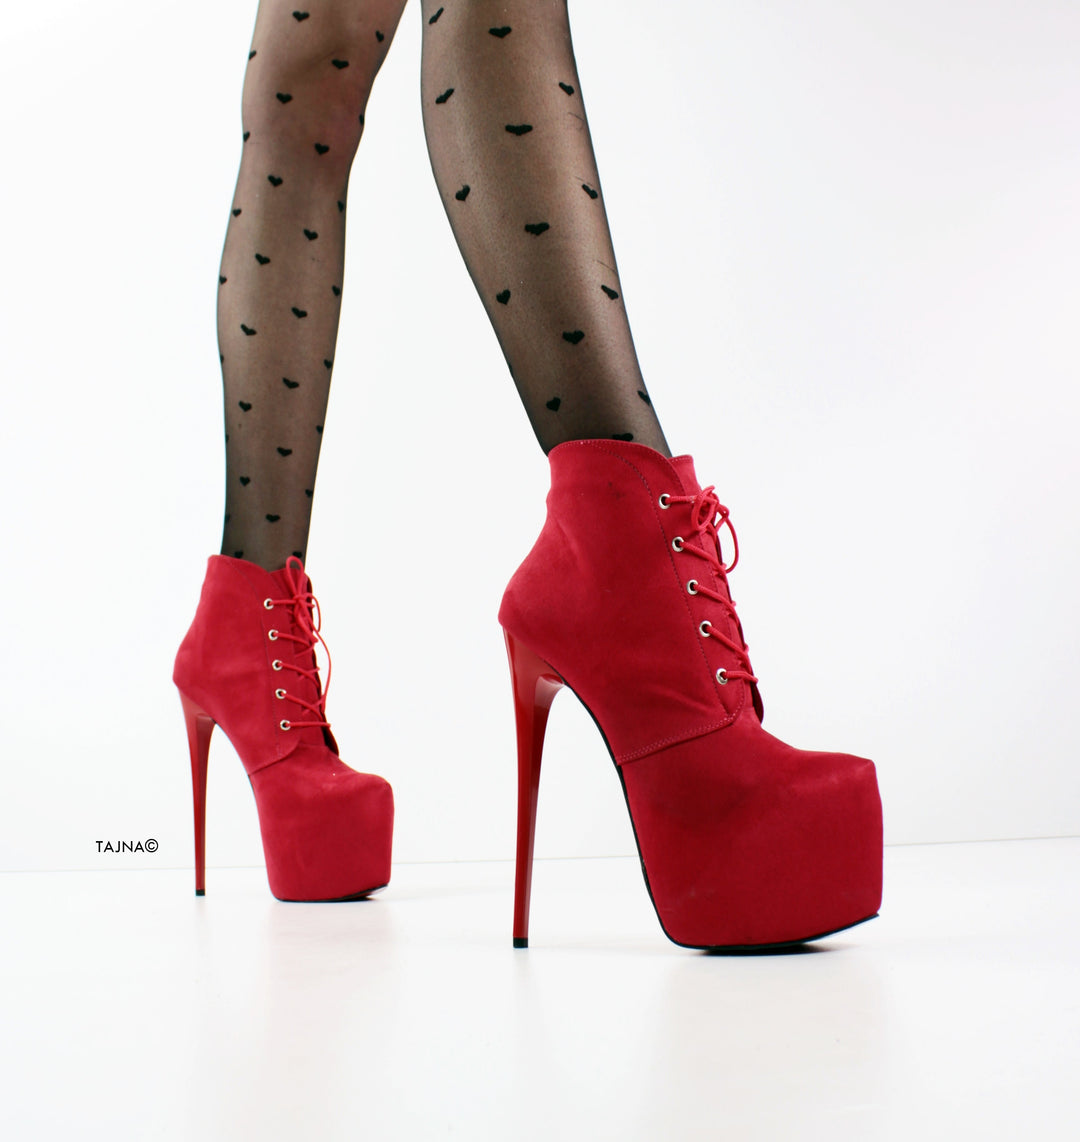 Ledna Lace Up Red Suede Ankle Booties - Tajna Club